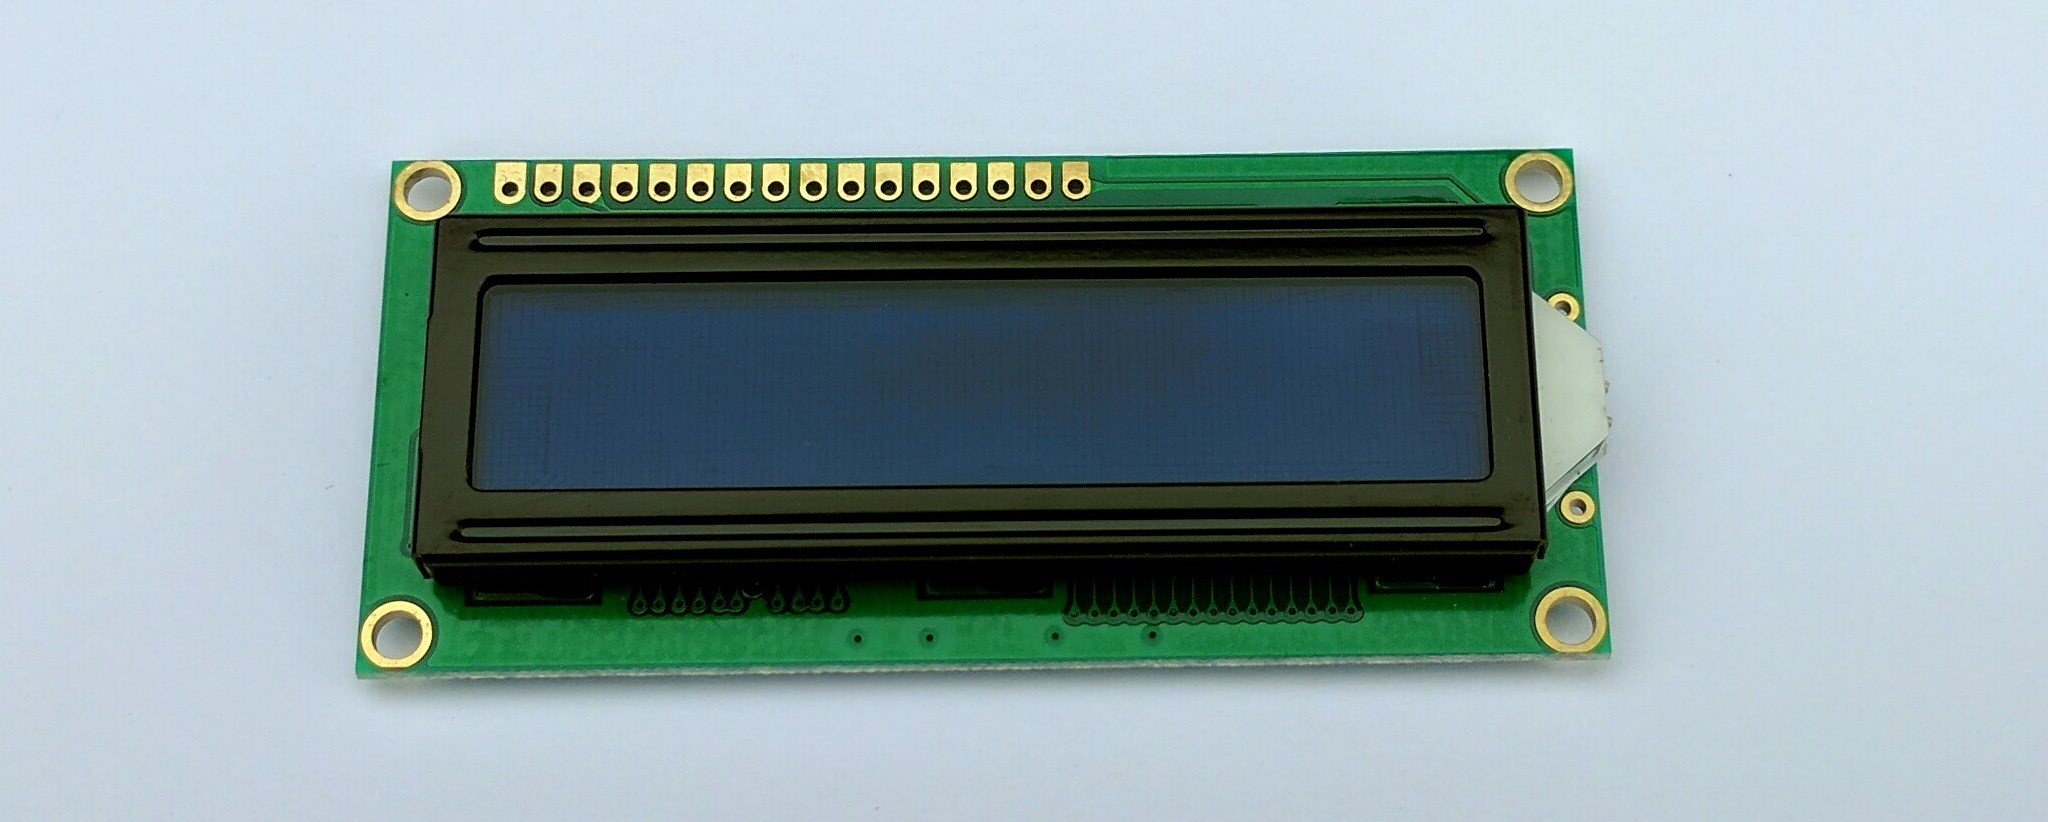 Typical LCD module